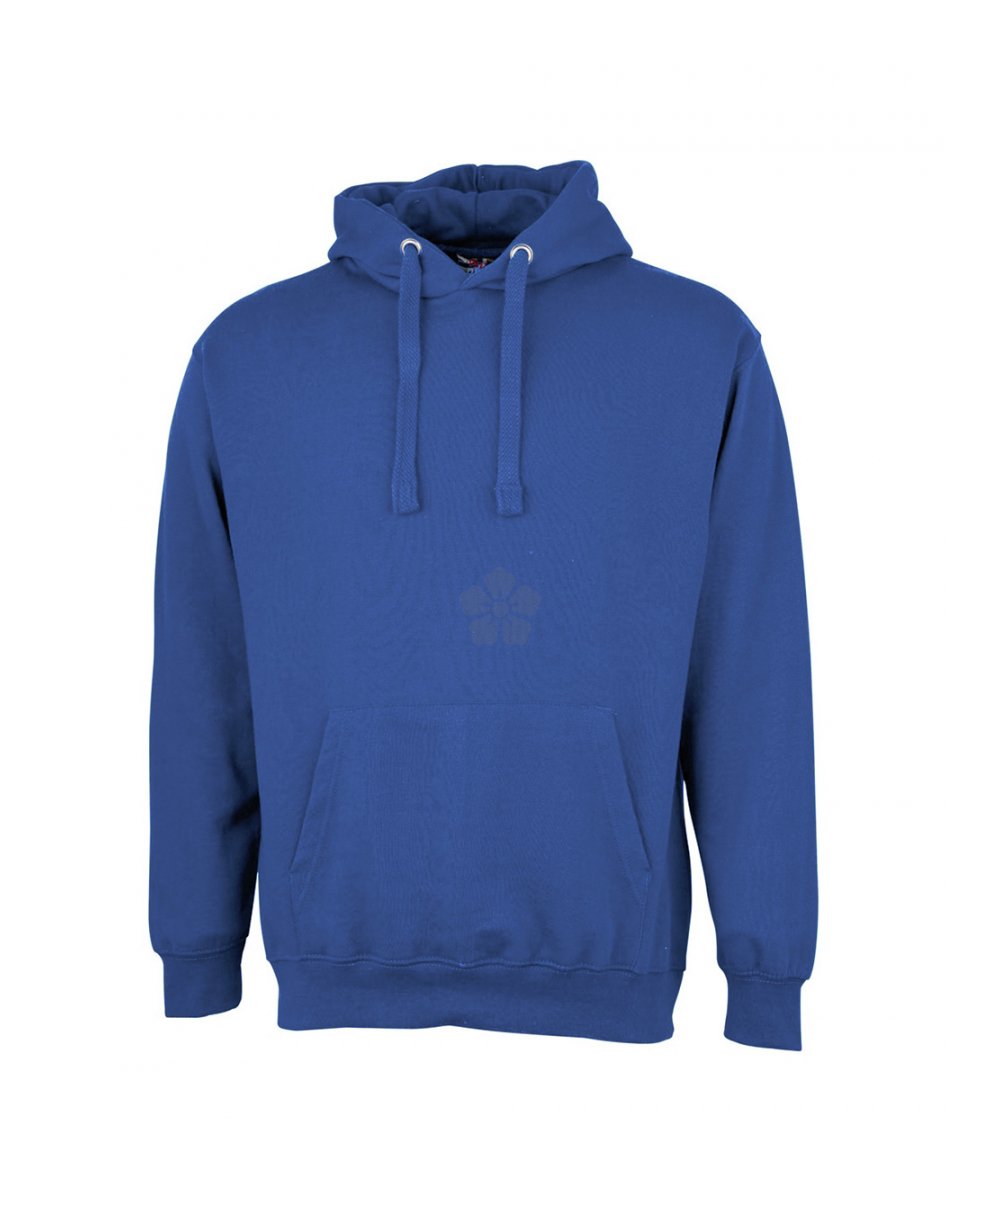 Promotional Classic Unisex Hoodie, Personalised by MoJo Promotions